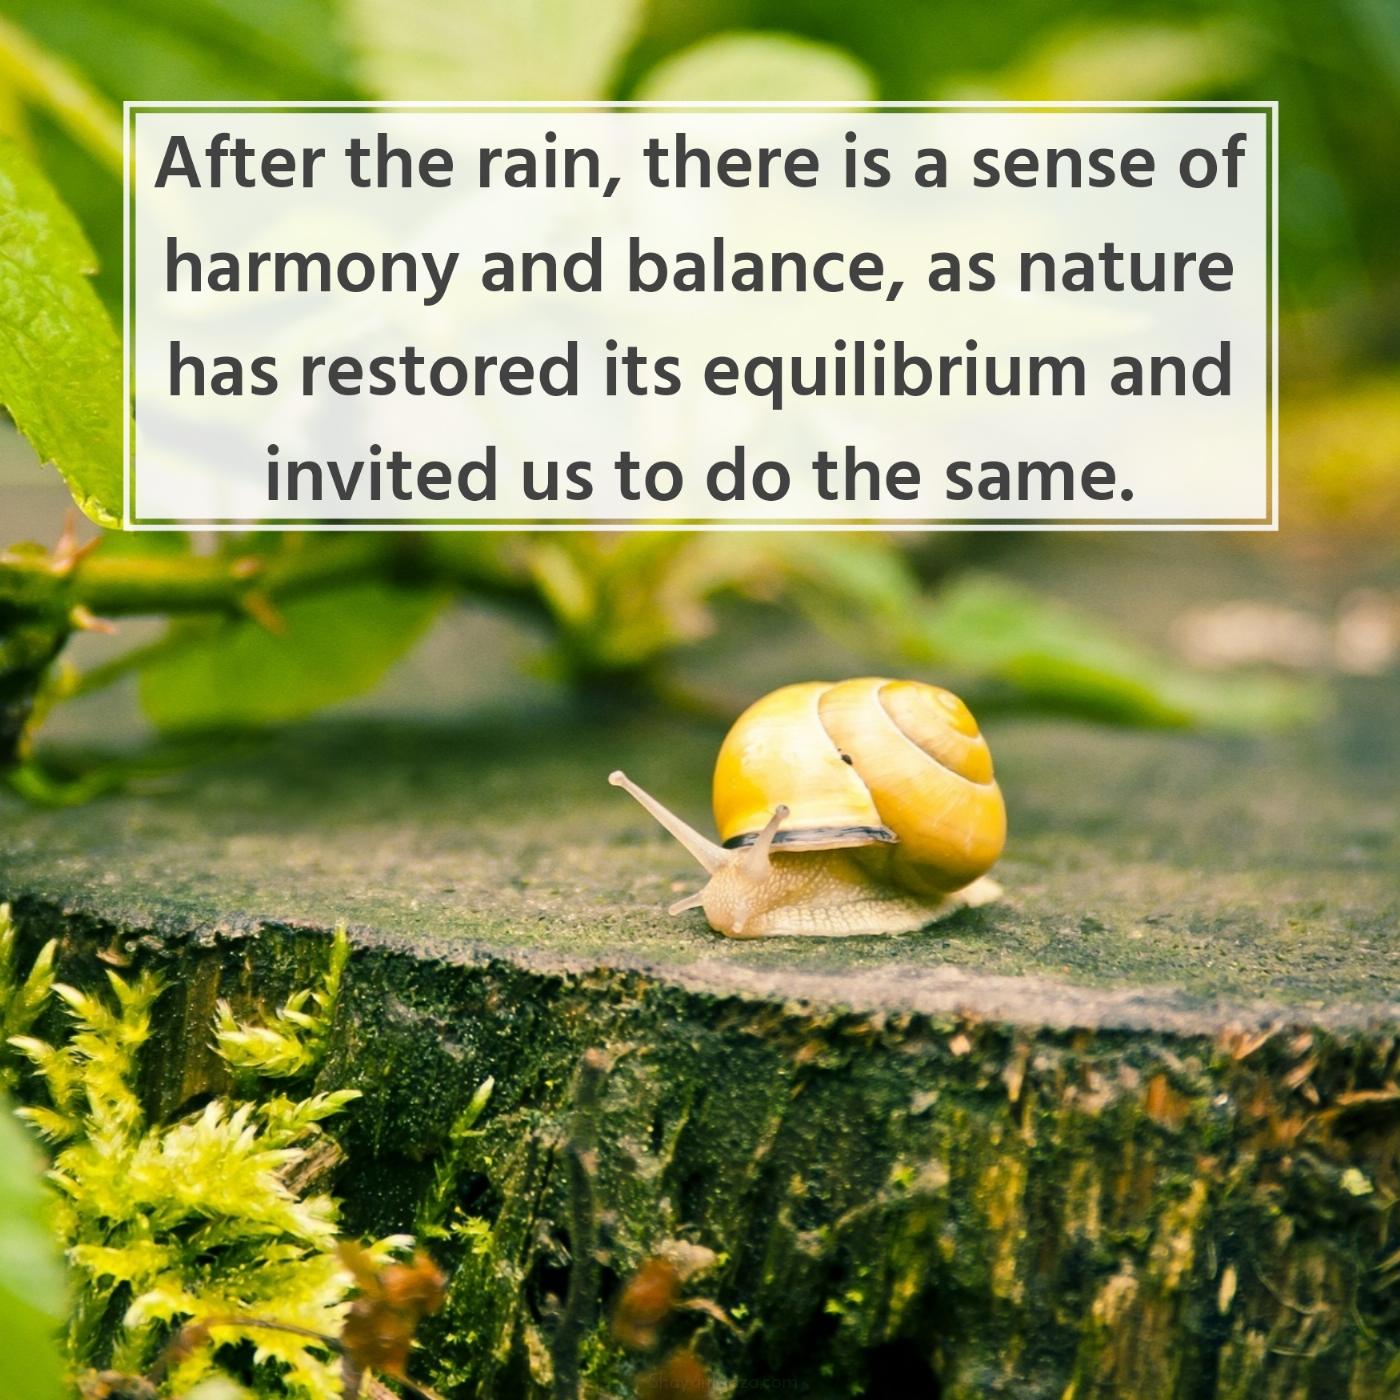 After the rain there is a sense of harmony and balance